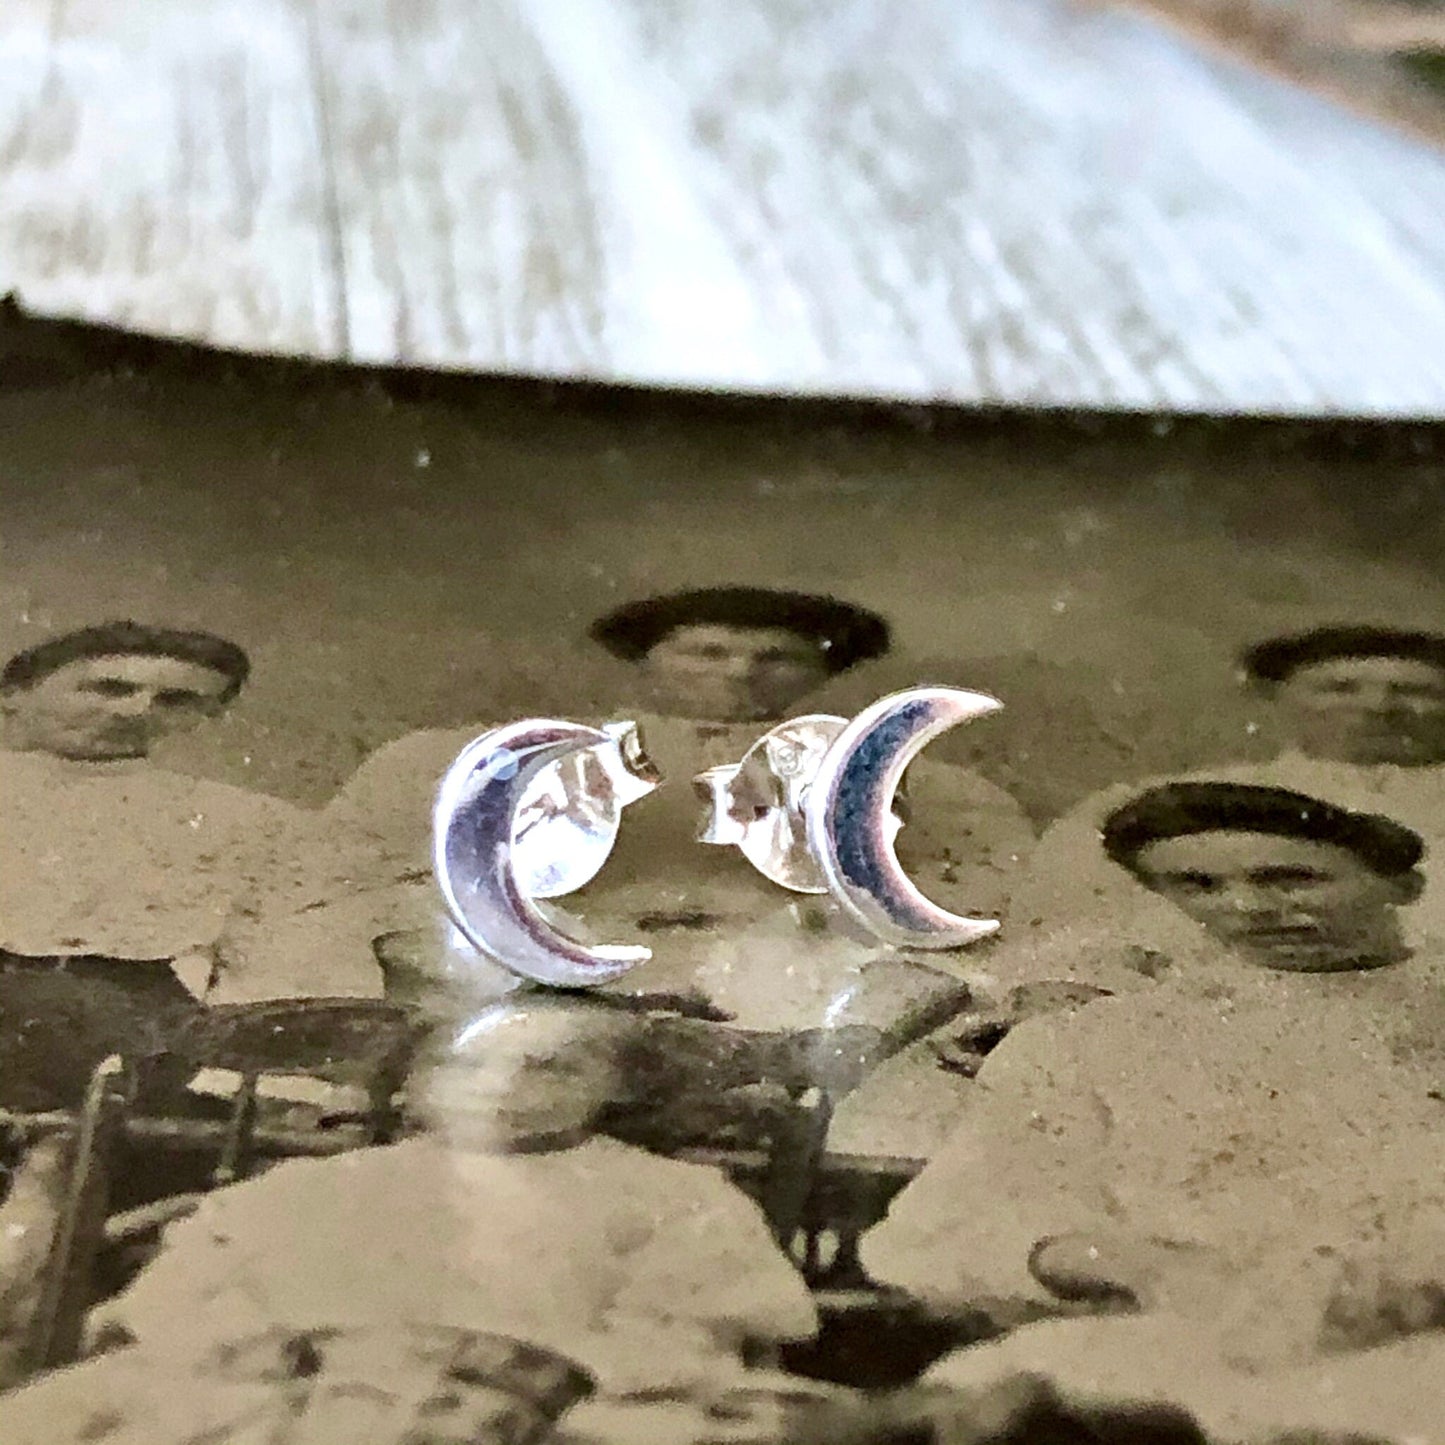 Tiny Sterling Silver Crescent Moon Post Earrings 7x5mm - Foxlark Crystal Jewelry